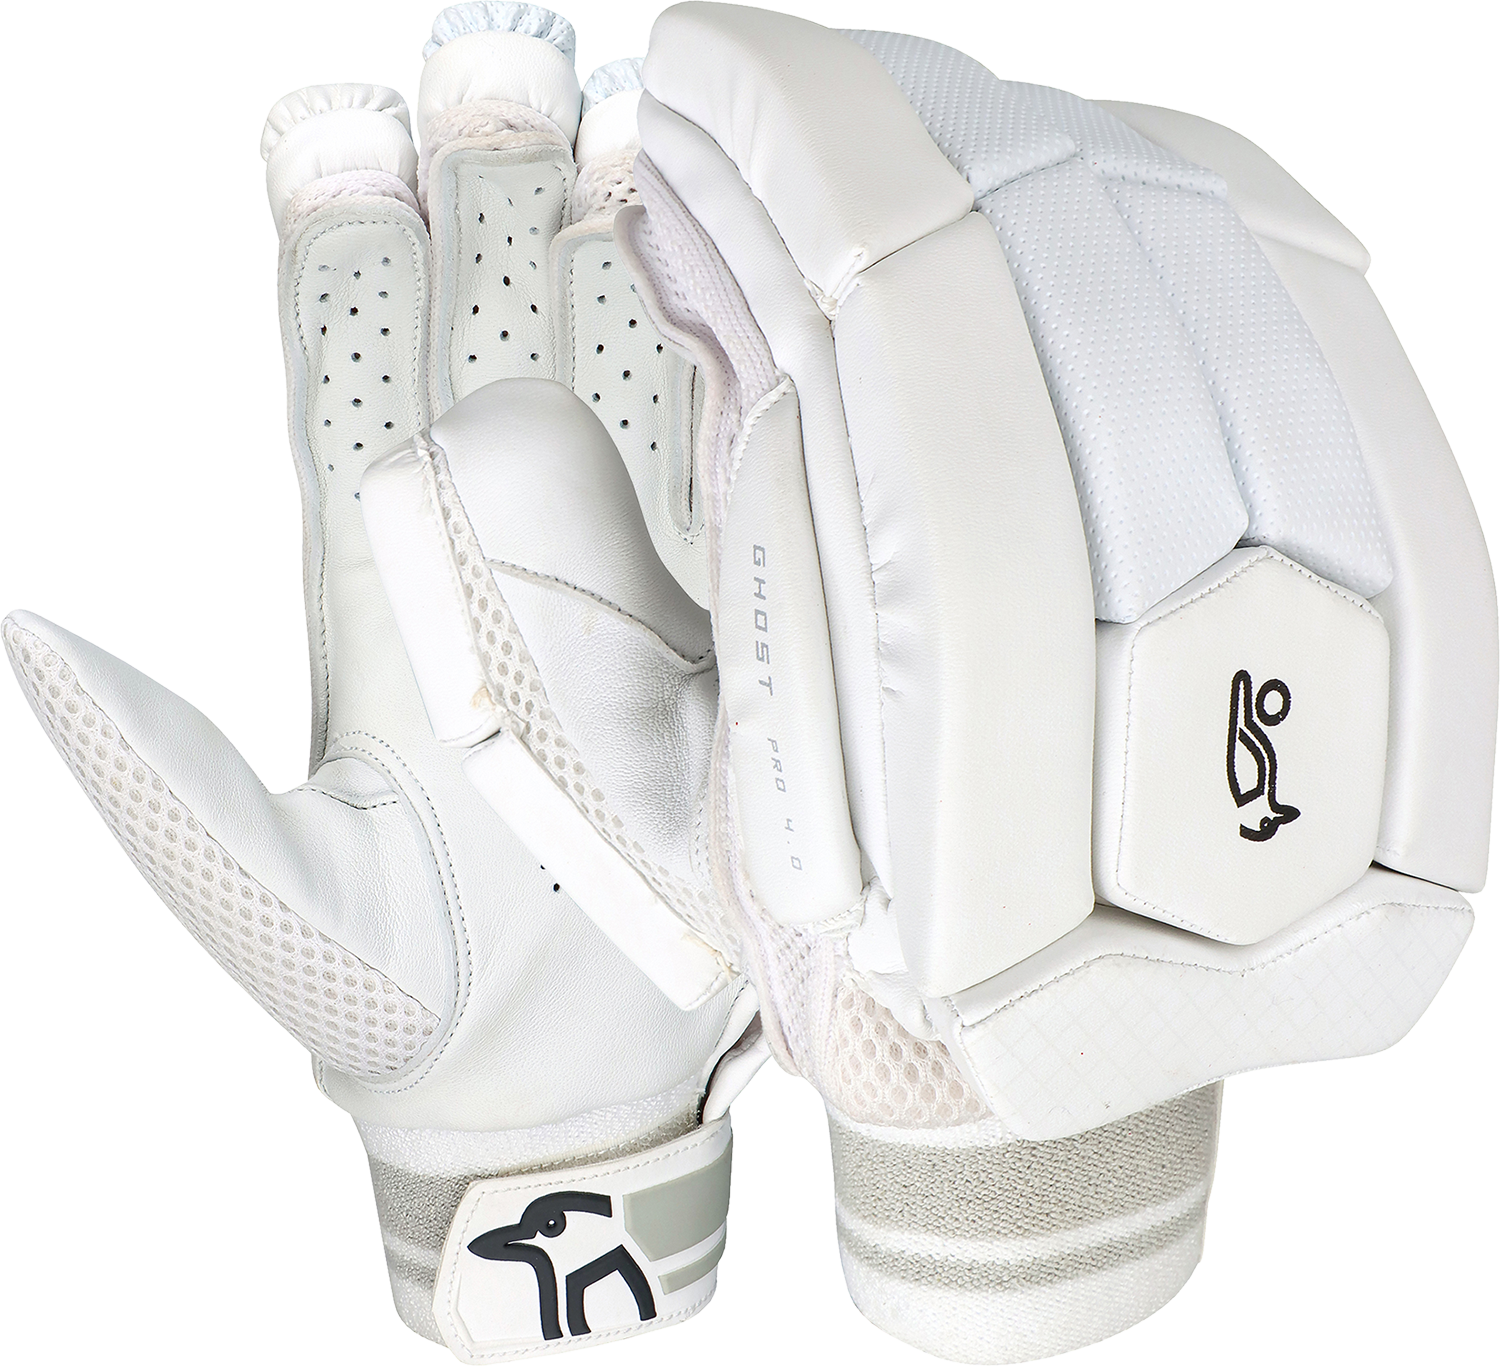 3a13194-ghost-pro-4.0-batting-glove-grouped-2.png